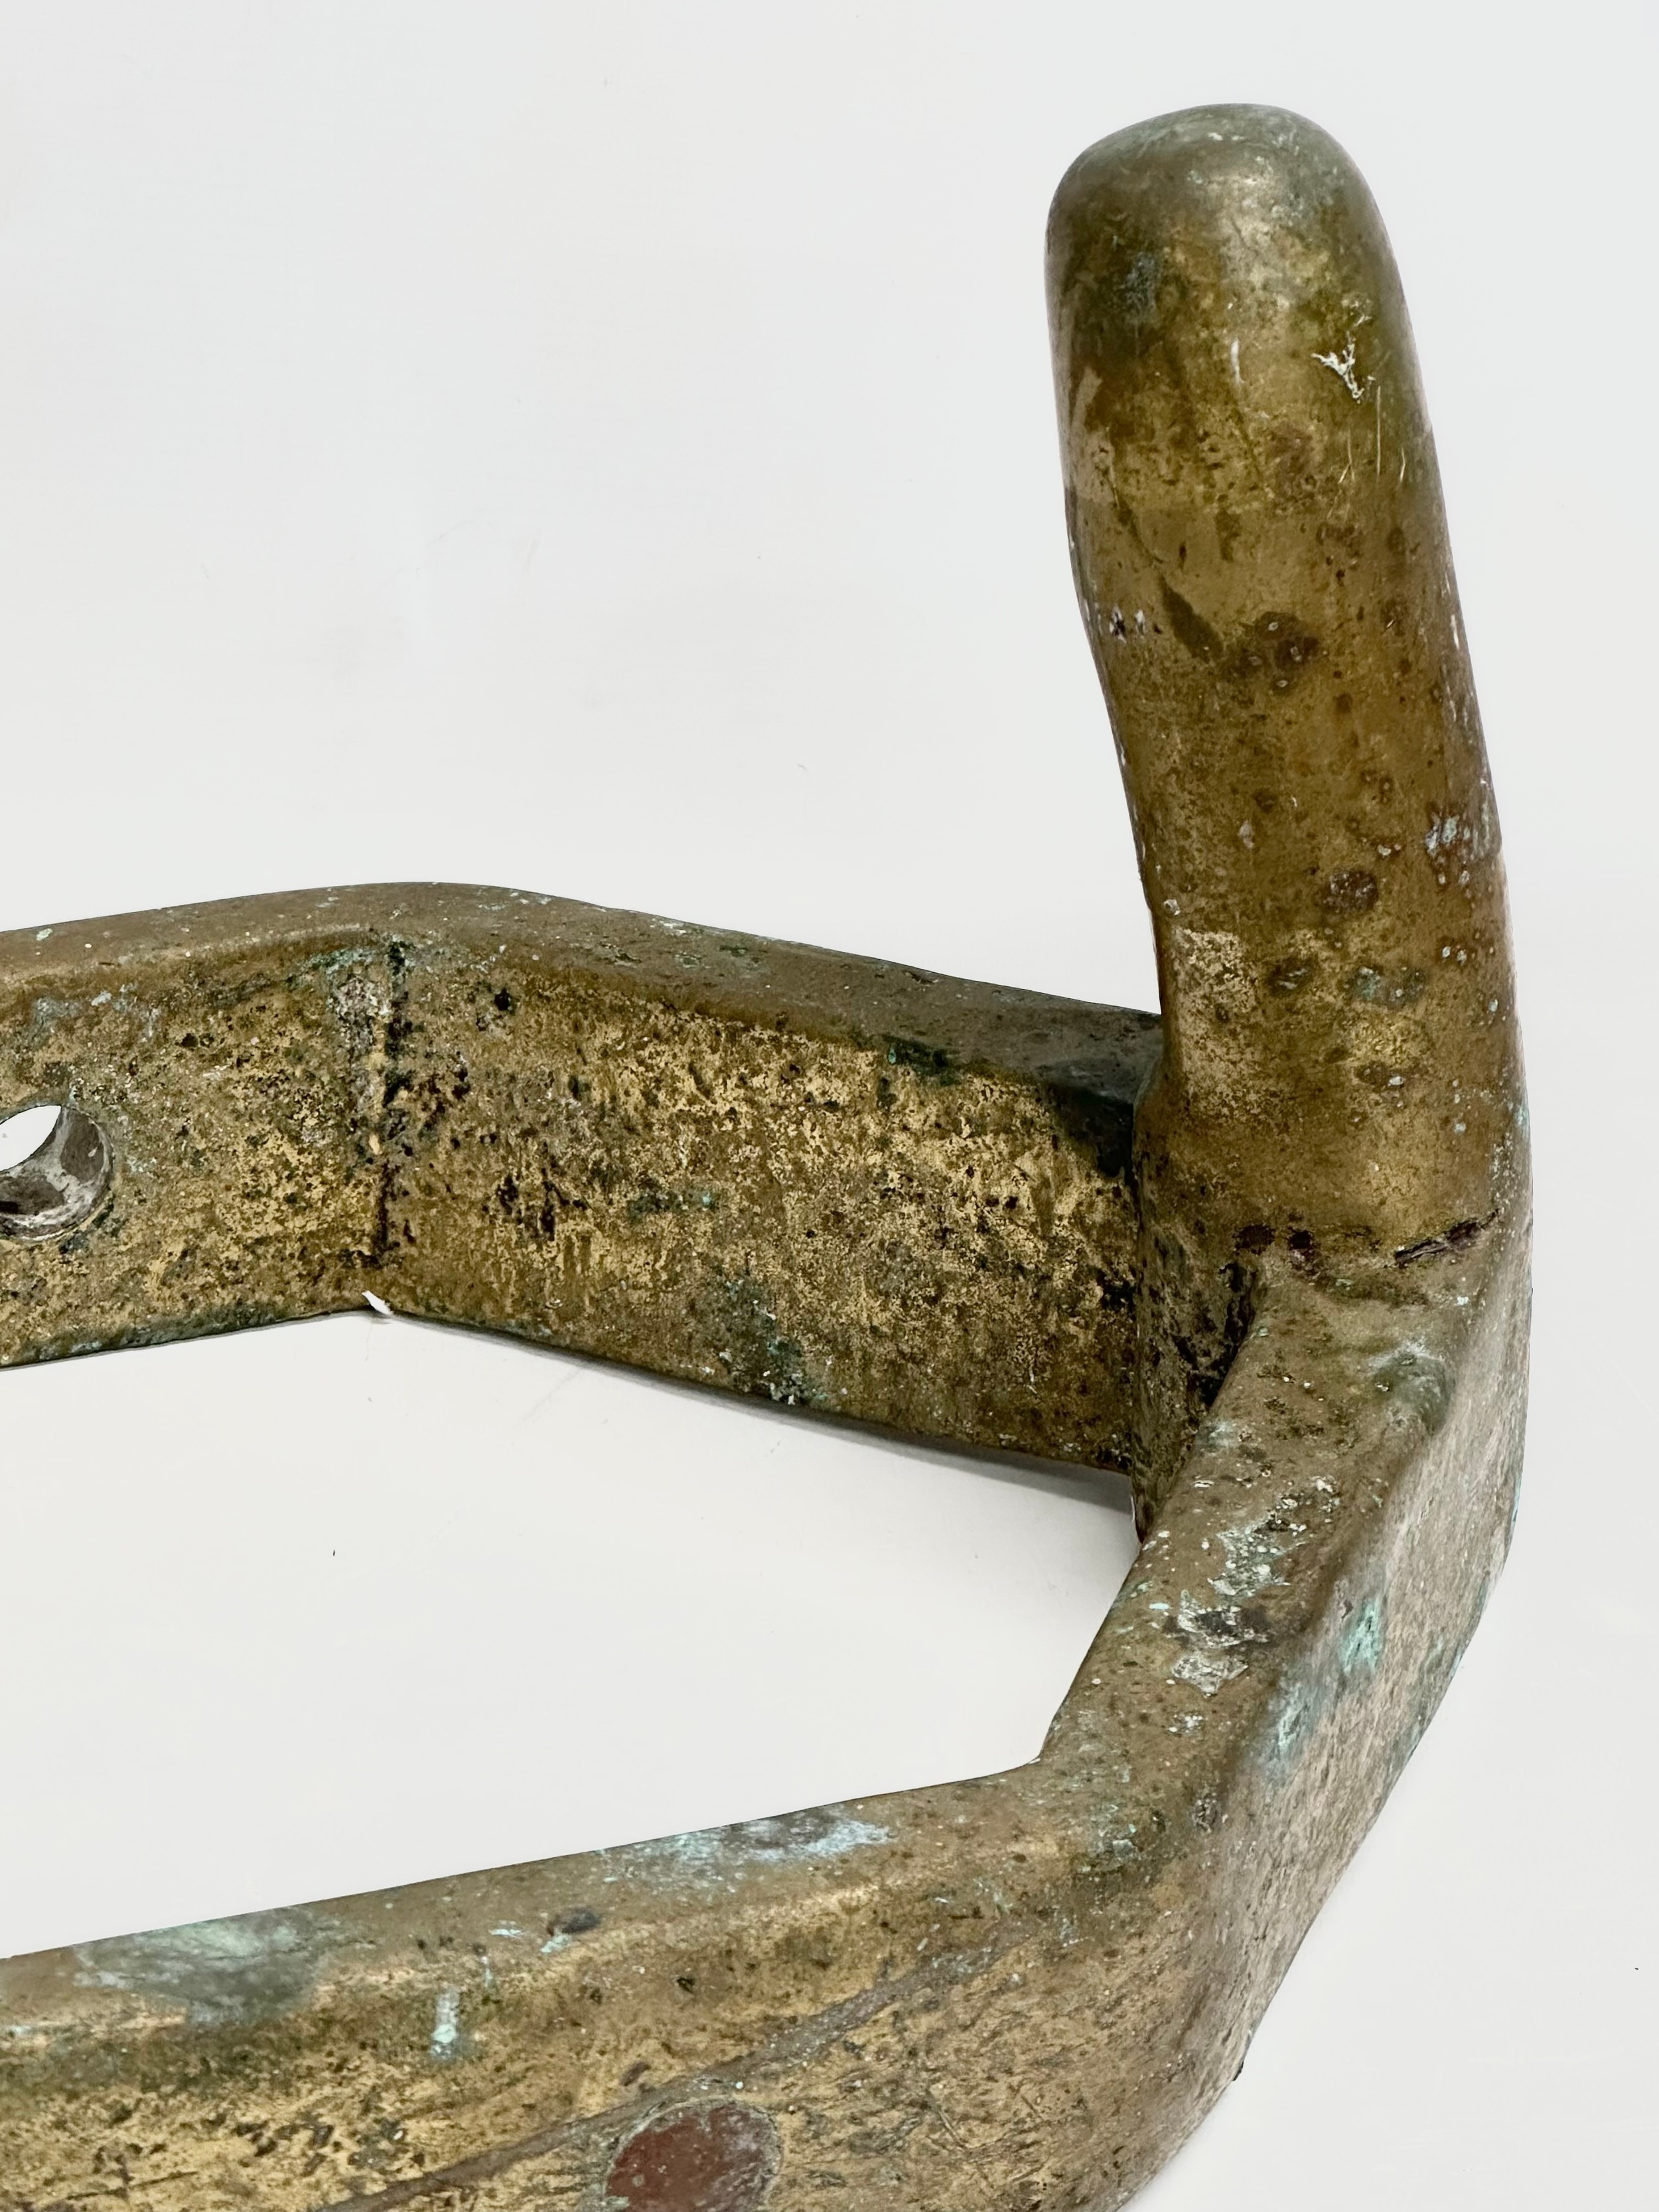 Two 16th Century bronze Gudgeons reportedly from a Spanish Galleon, 71x33x27cm - Image 3 of 7